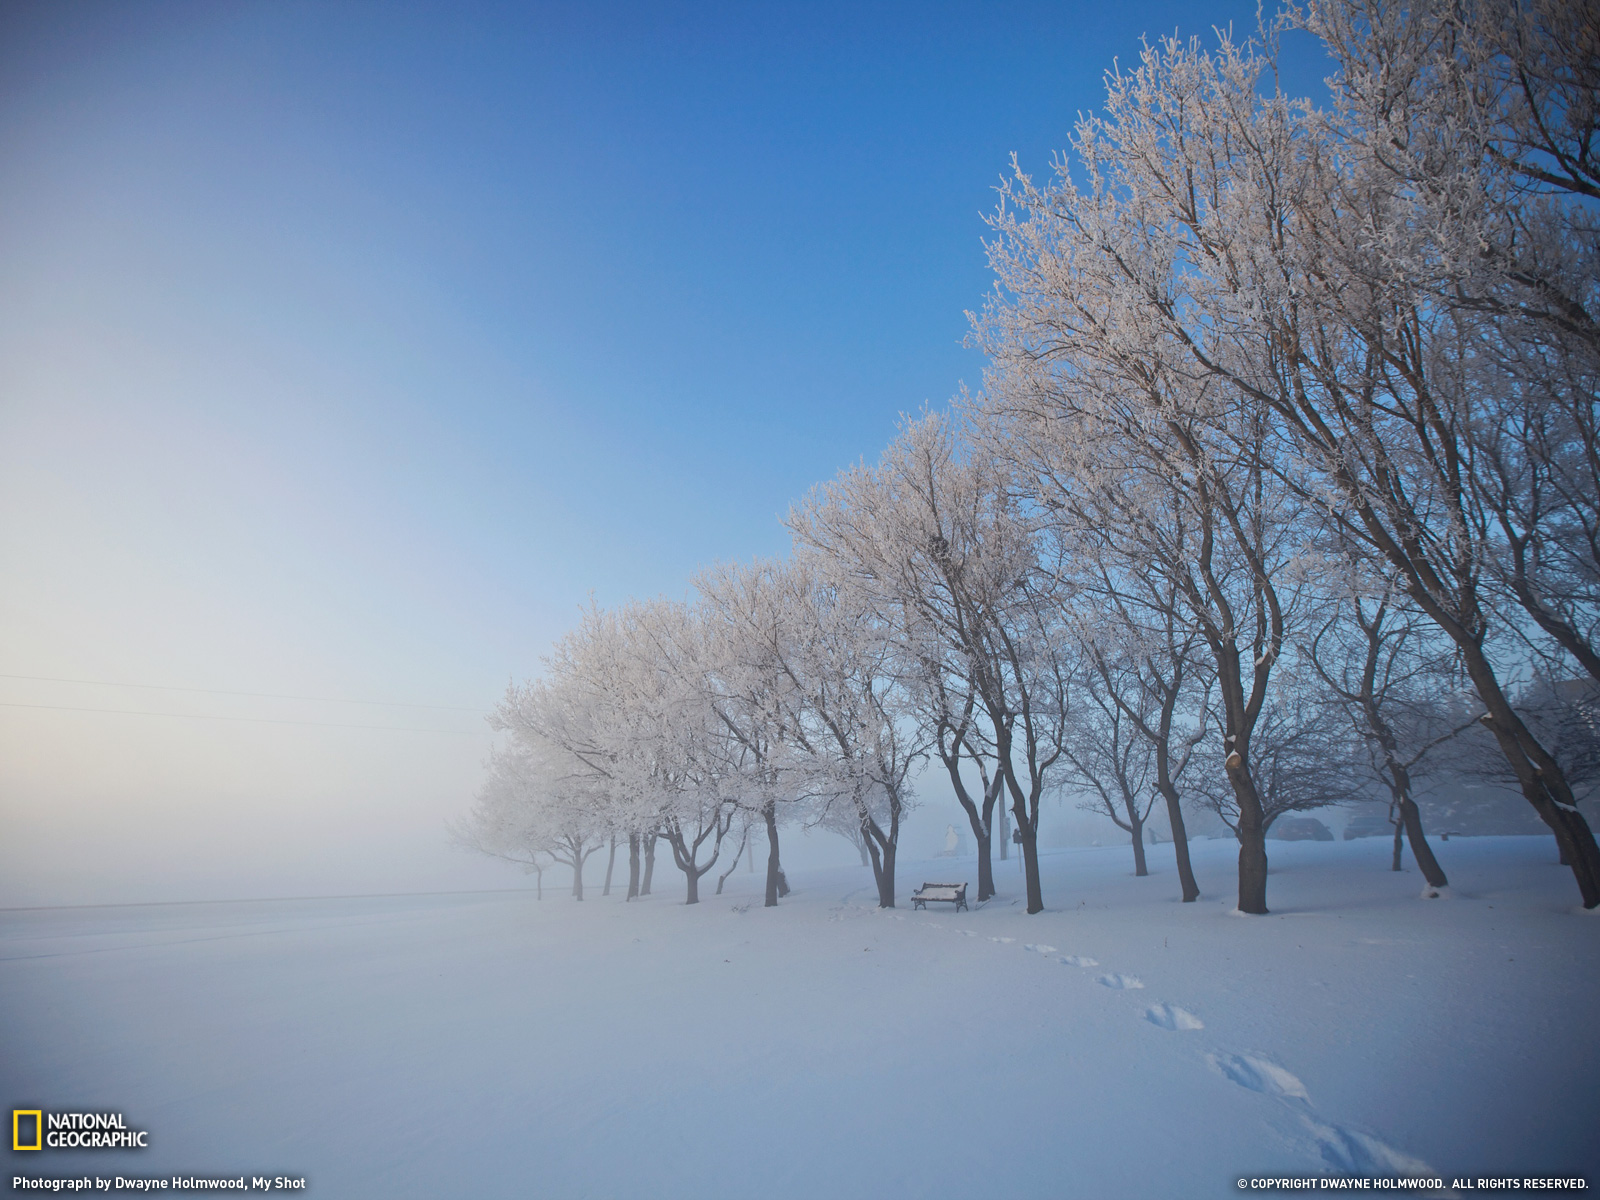  Photo Snow Wallpaper National Geographic Photo of the Day